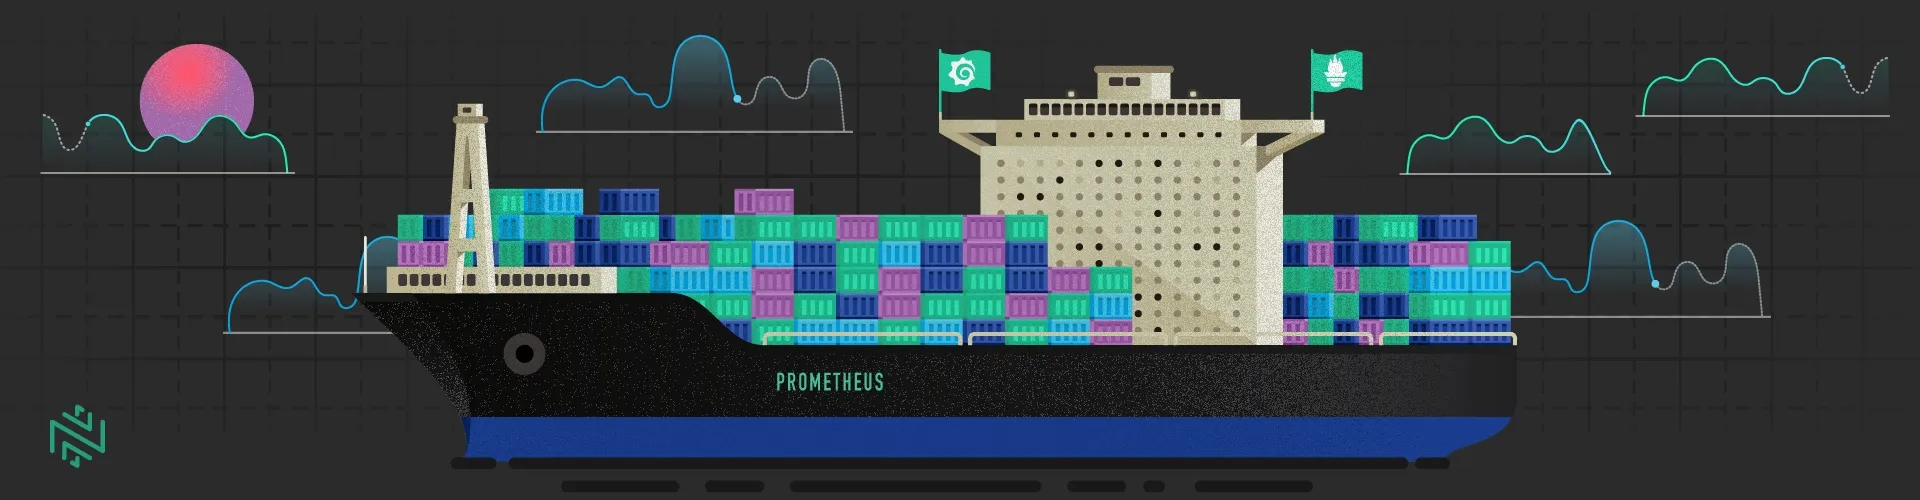 Services and resources monitoring with Prometheus and Grafana running on Docker